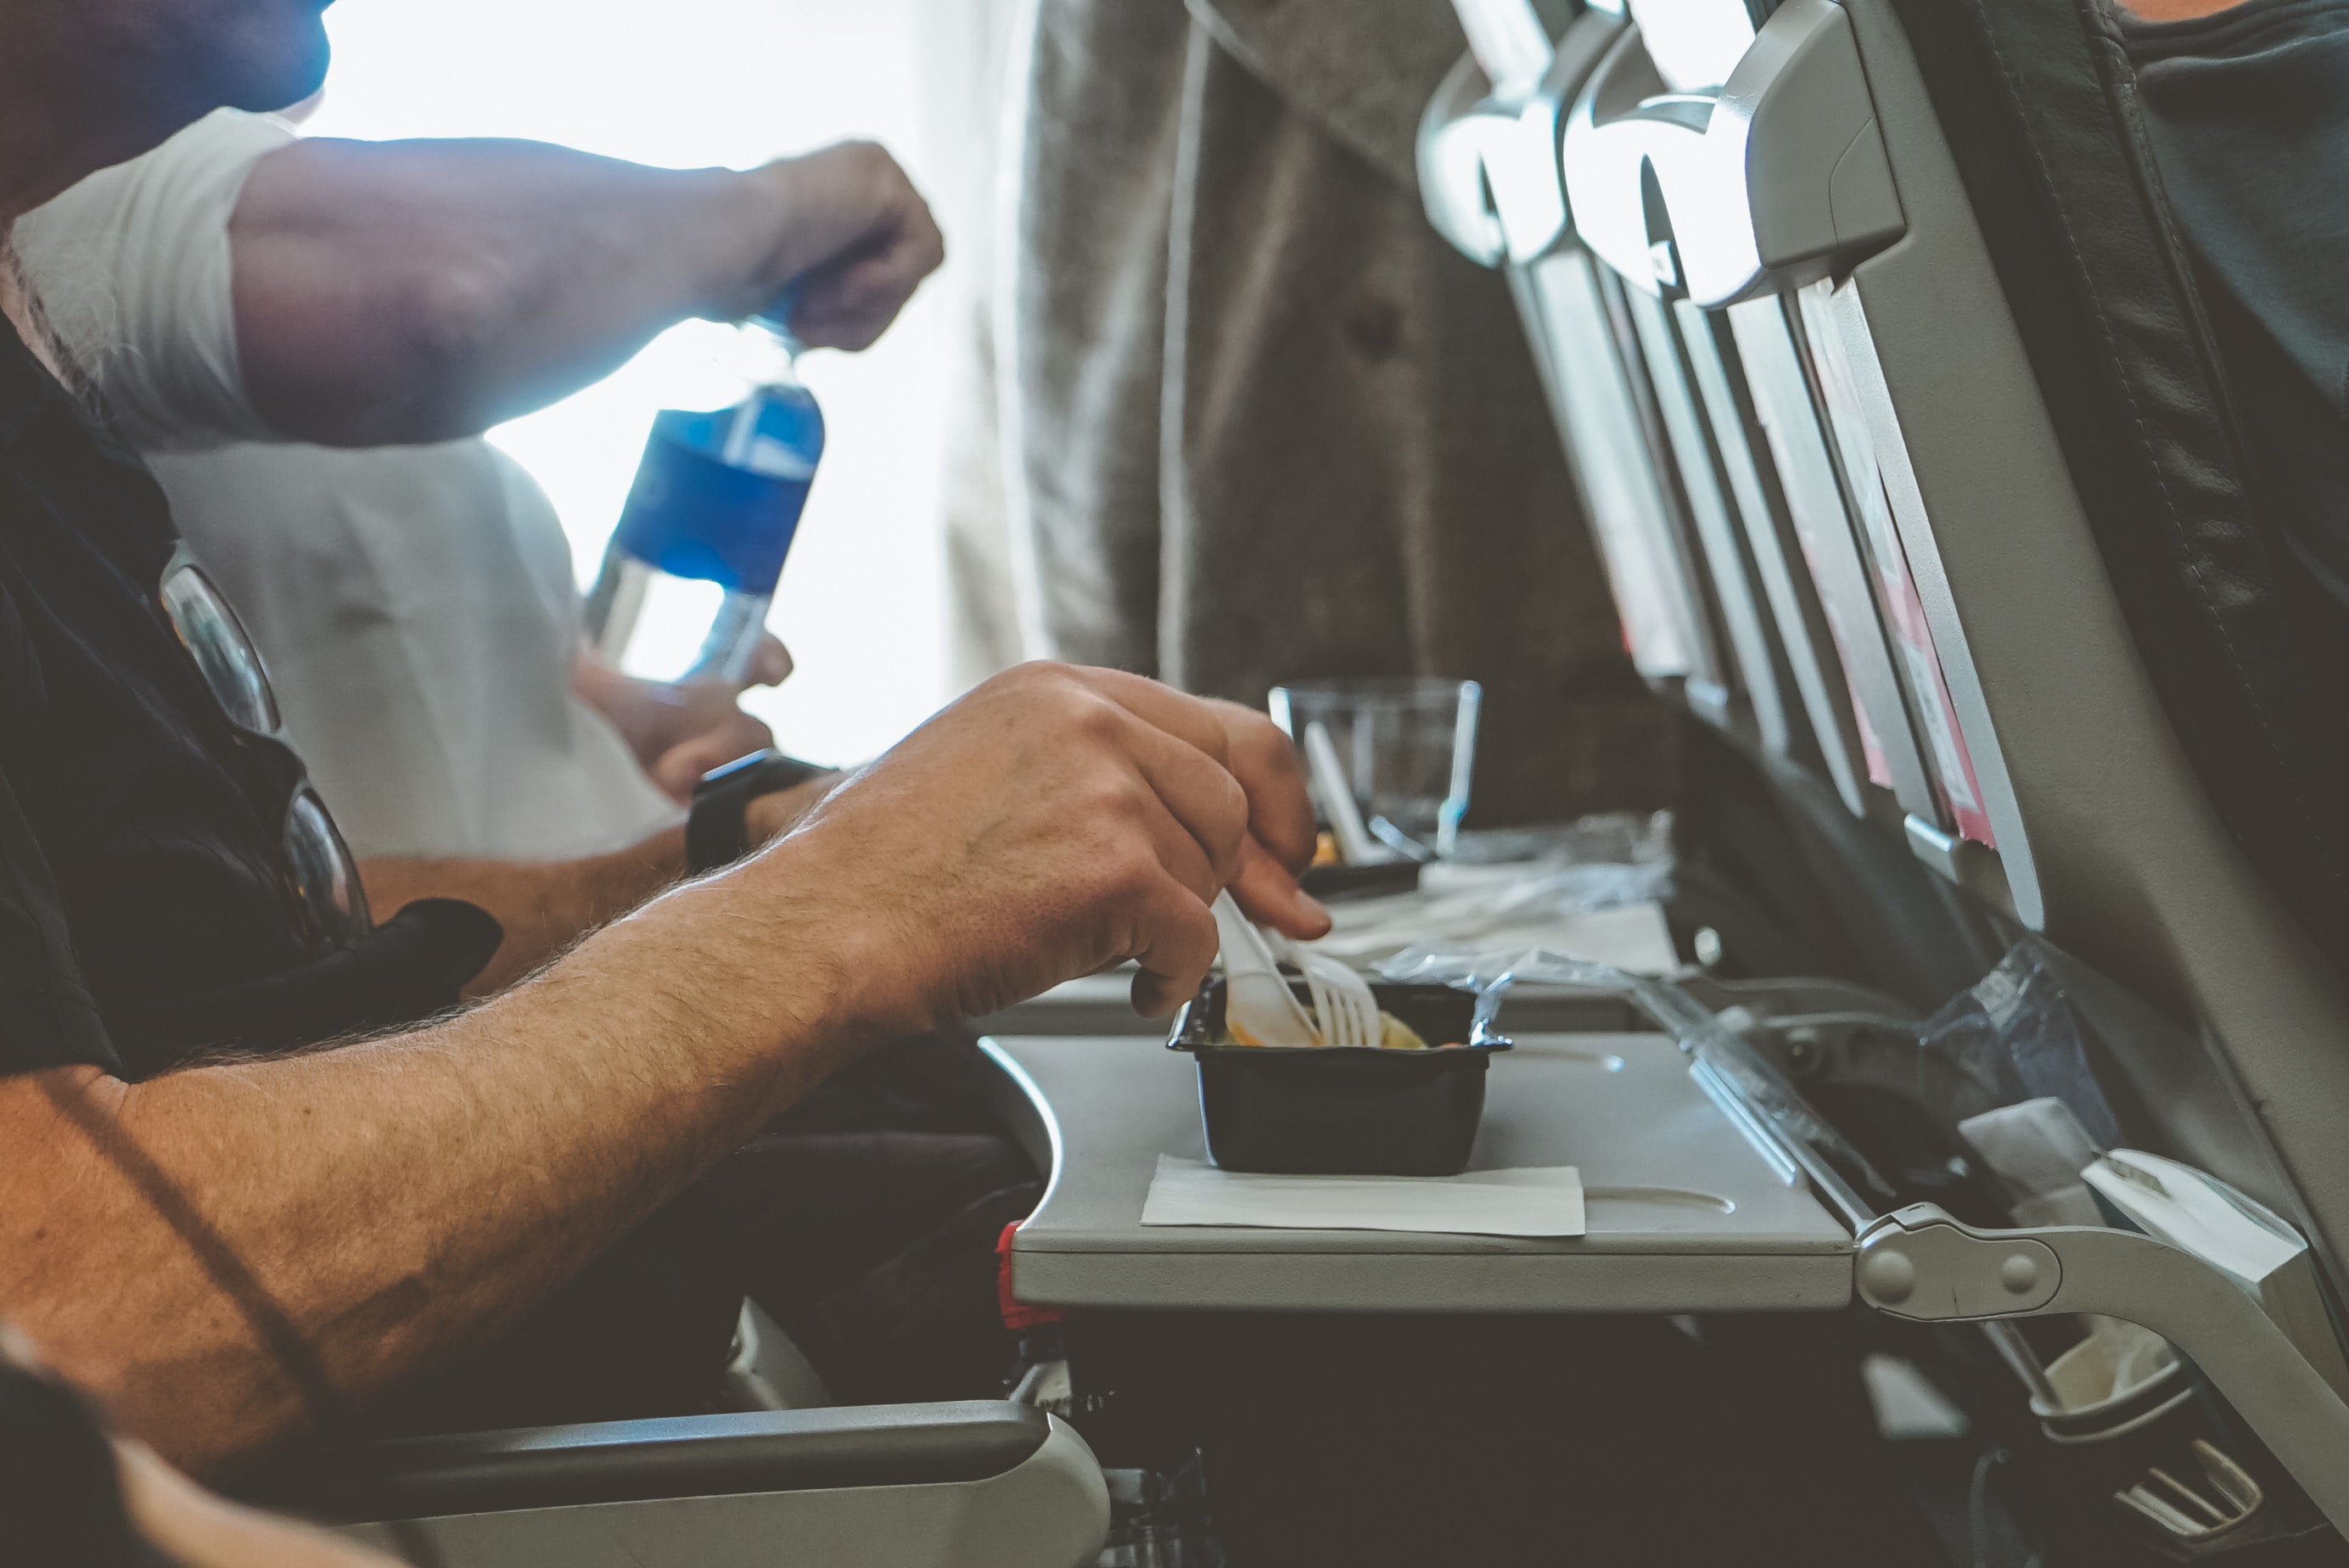 Say goodbye to single-use bottles on planes and hello to branded reusable bottles!